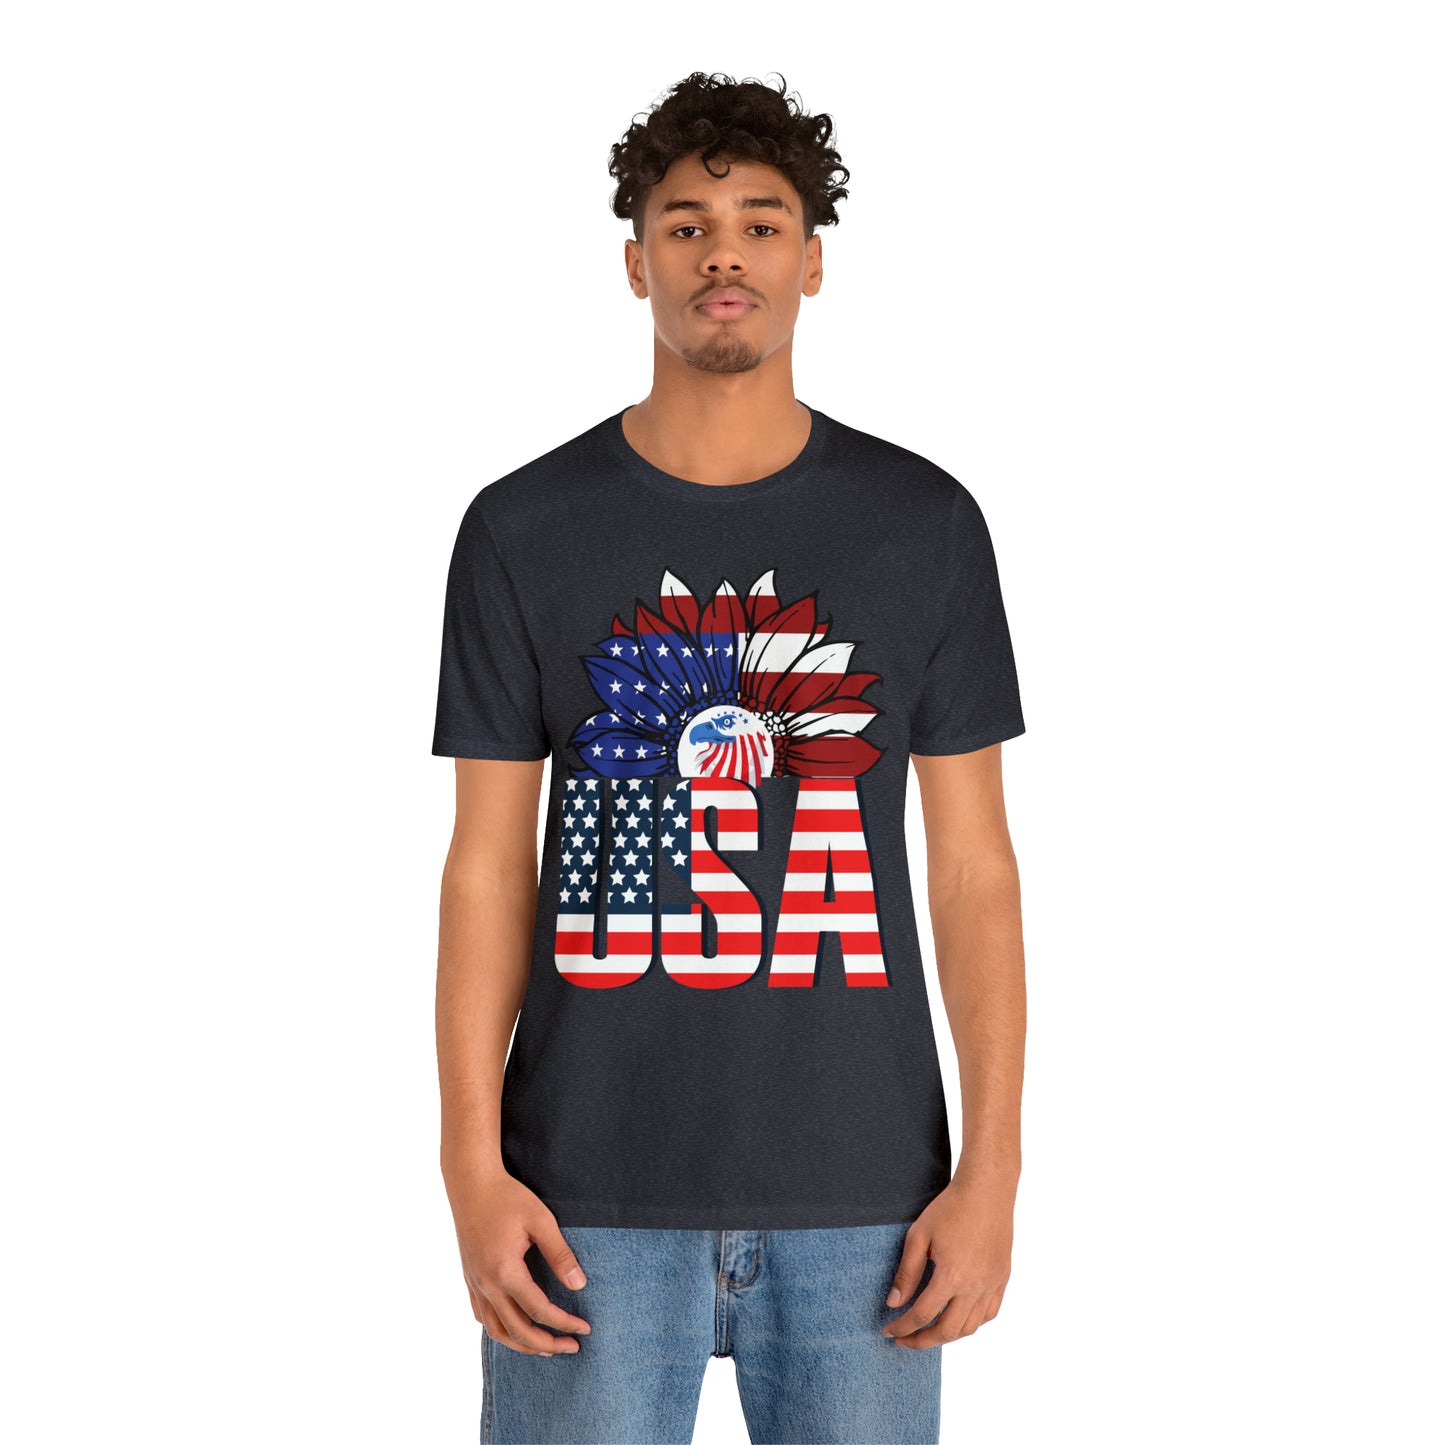 Independence Day shirt, American flag shirt, Red, white, and blue shirt,